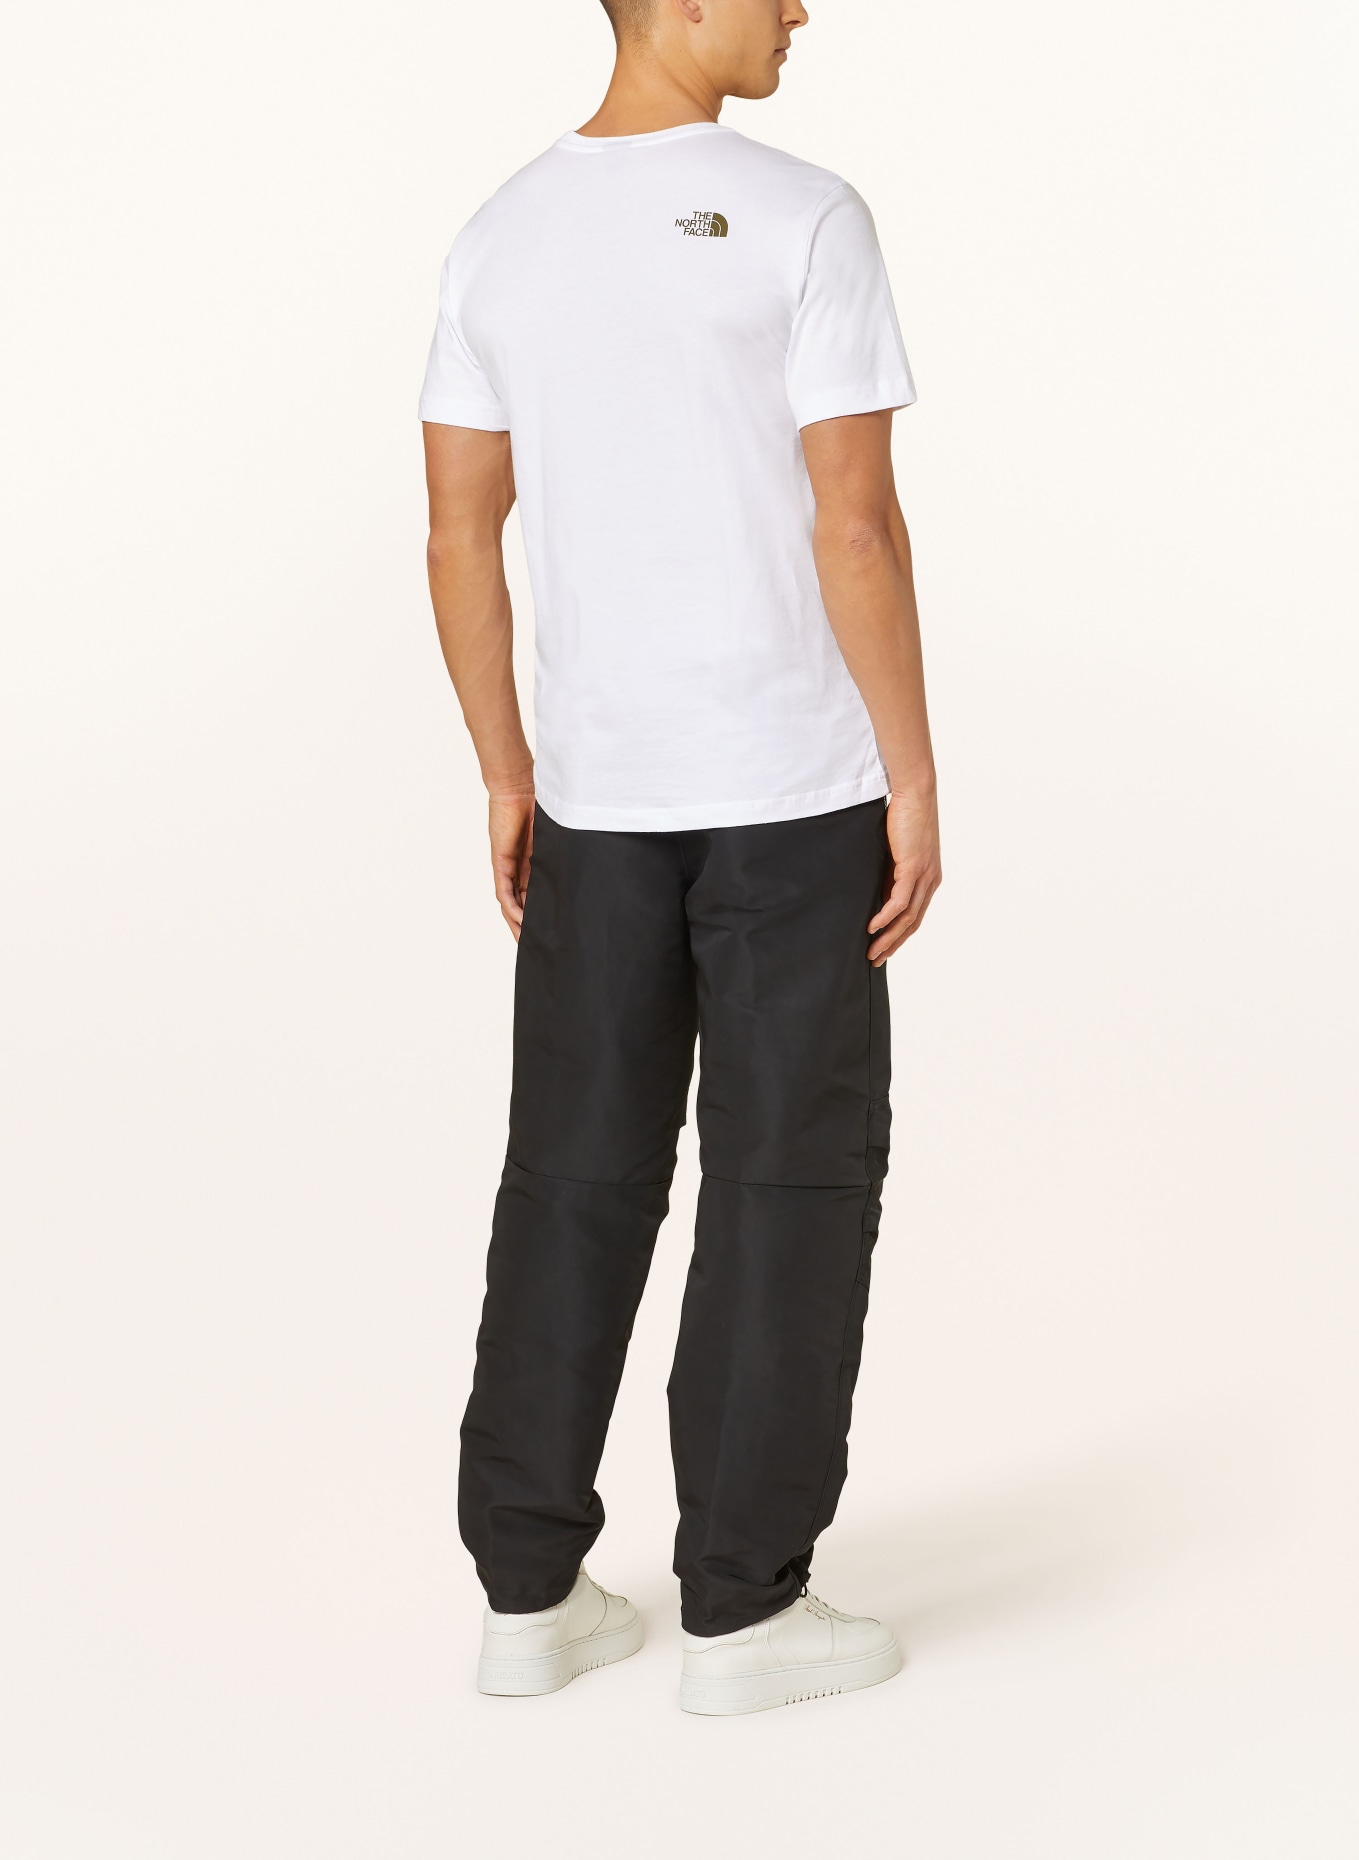 THE NORTH FACE T-Shirt, Farbe: WEISS (Bild 3)